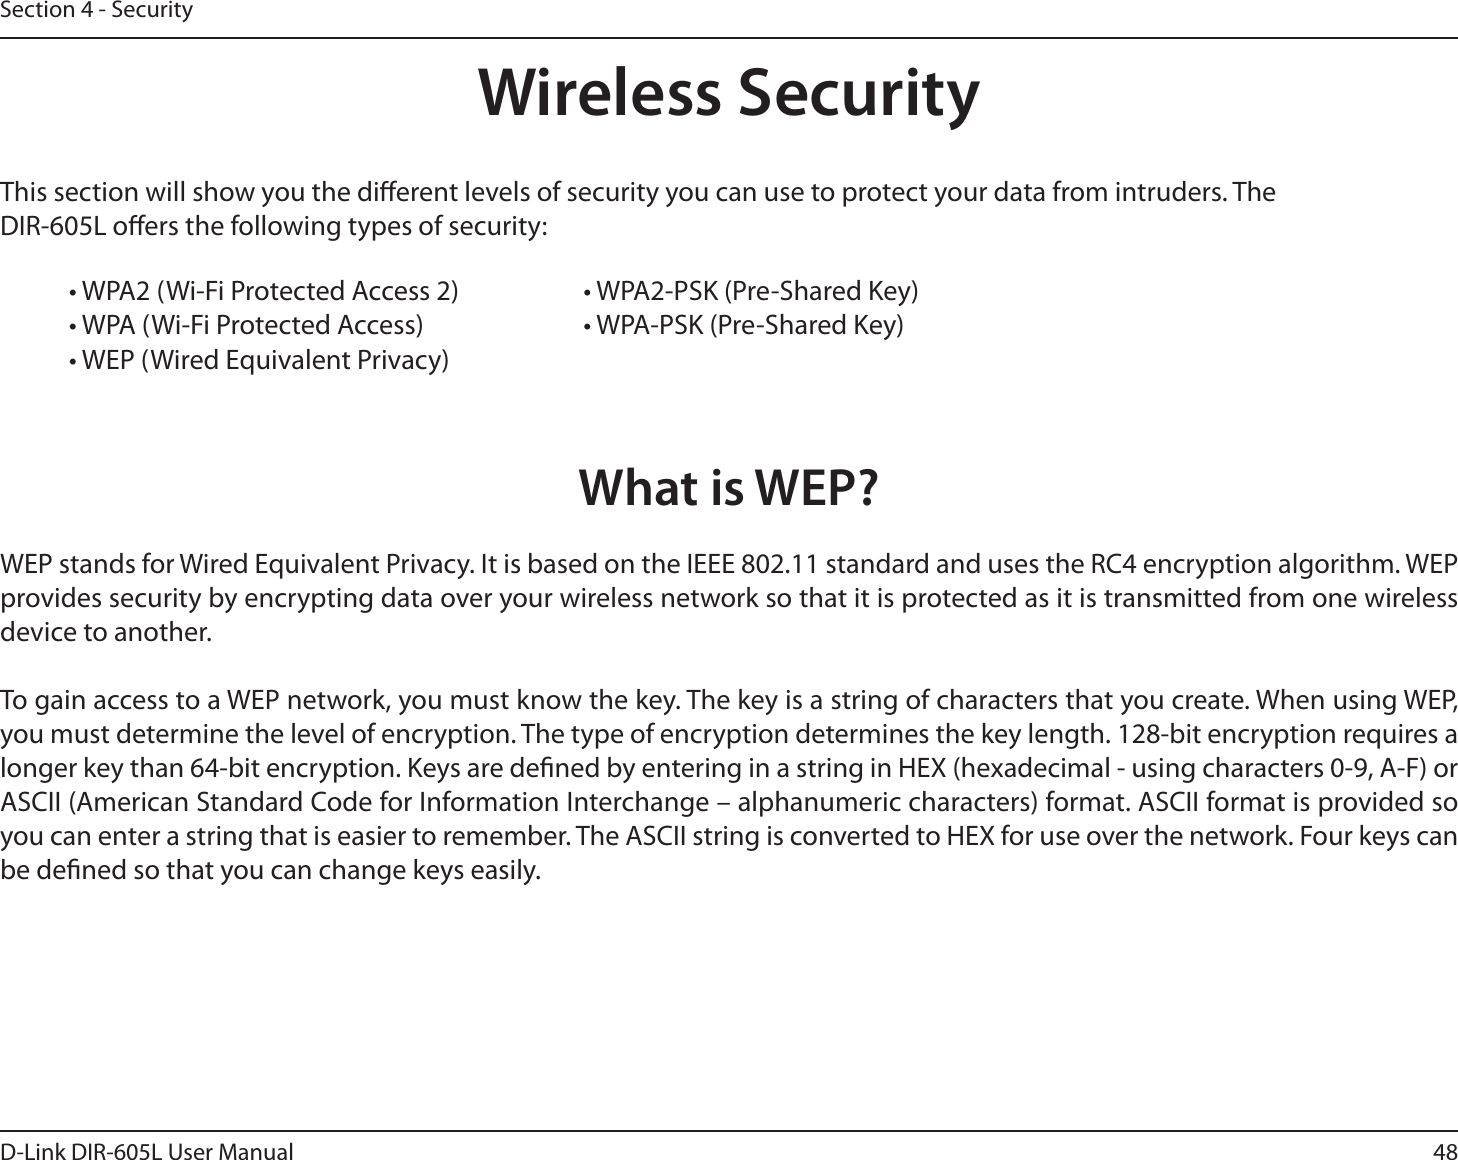 48D-Link DIR-605L User ManualSection 4 - SecurityWireless SecurityThis section will show you the dierent levels of security you can use to protect your data from intruders. The DIR-605L oers the following types of security:• WPA2 (Wi-Fi Protected Access 2)     • WPA2-PSK (Pre-Shared Key)• WPA (Wi-Fi Protected Access)      • WPA-PSK (Pre-Shared Key)• WEP (Wired Equivalent Privacy)What is WEP?WEP stands for Wired Equivalent Privacy. It is based on the IEEE 802.11 standard and uses the RC4 encryption algorithm. WEP provides security by encrypting data over your wireless network so that it is protected as it is transmitted from one wireless device to another.To gain access to a WEP network, you must know the key. The key is a string of characters that you create. When using WEP, you must determine the level of encryption. The type of encryption determines the key length. 128-bit encryption requires a longer key than 64-bit encryption. Keys are dened by entering in a string in HEX (hexadecimal - using characters 0-9, A-F) or ASCII (American Standard Code for Information Interchange – alphanumeric characters) format. ASCII format is provided so you can enter a string that is easier to remember. The ASCII string is converted to HEX for use over the network. Four keys can be dened so that you can change keys easily.